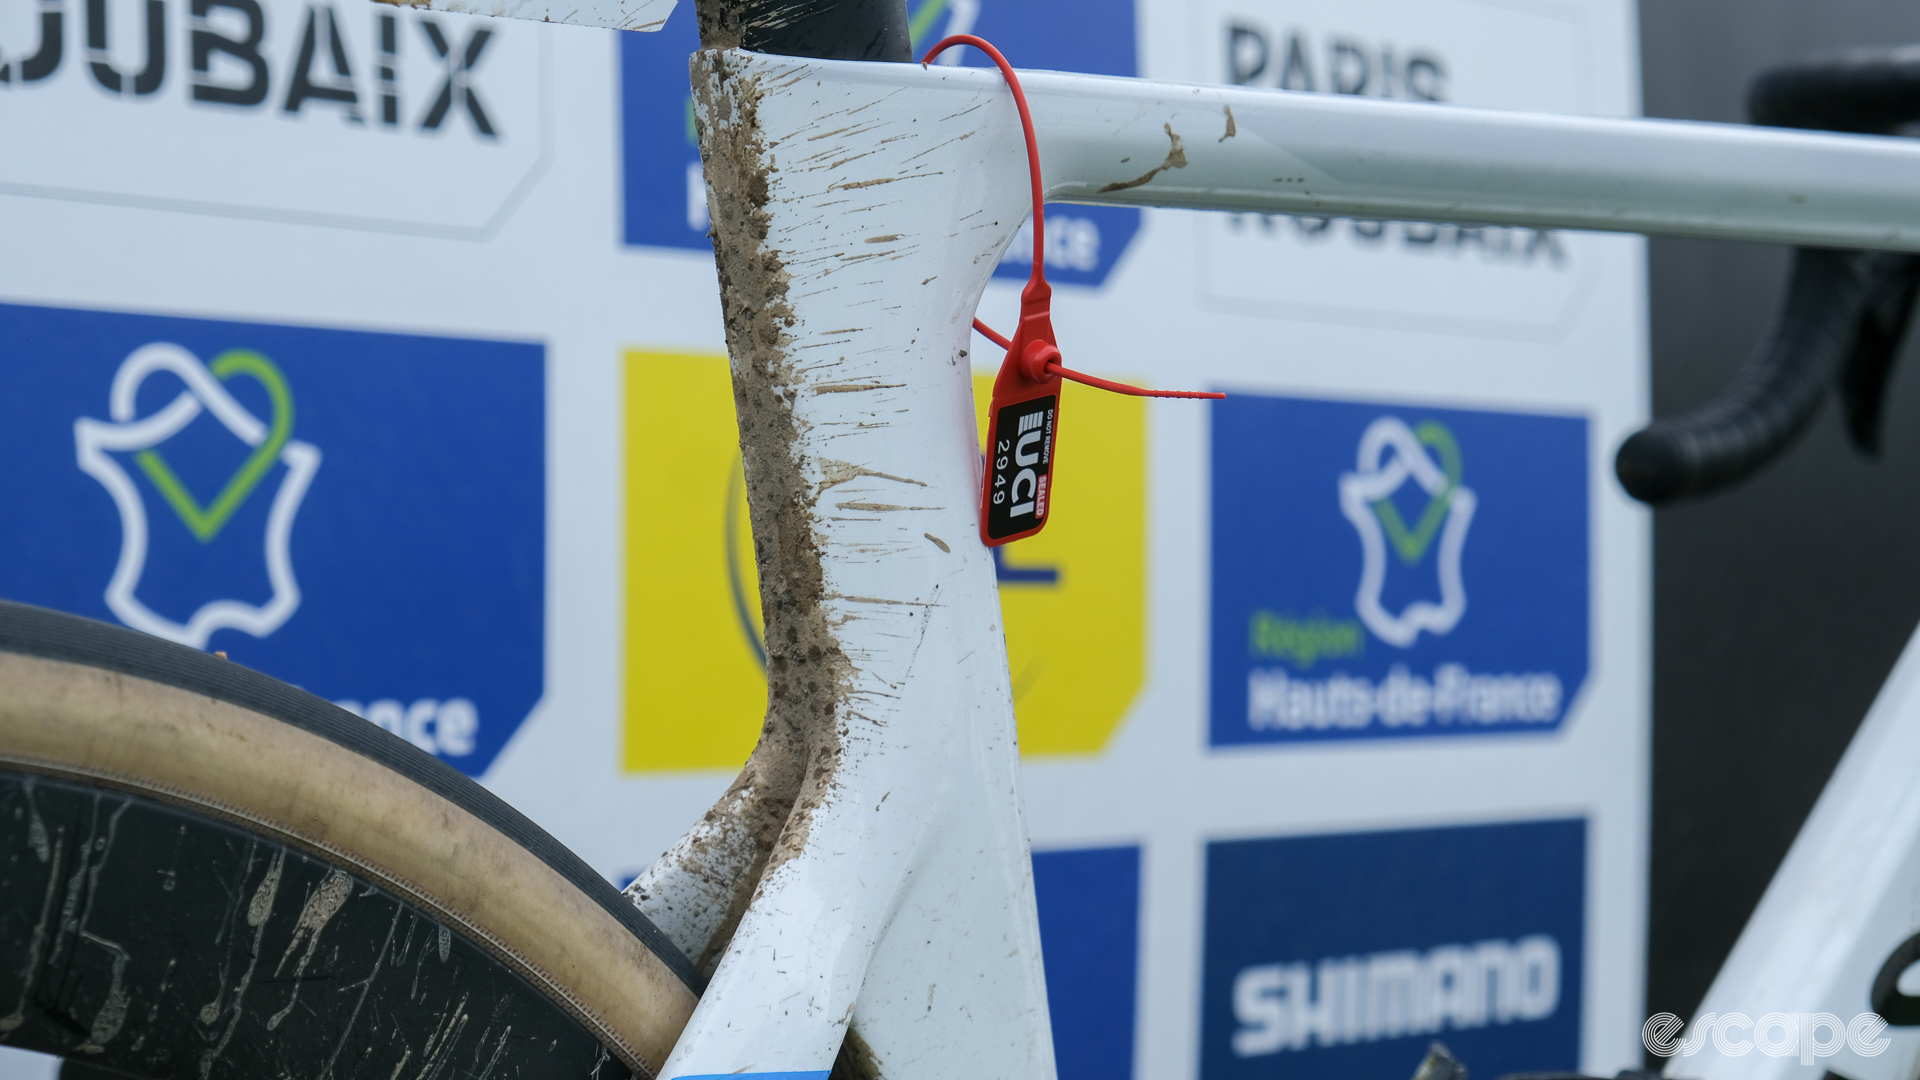 The image shows Mathieu van der Poel's Canyon Aeroad muddy seatpost